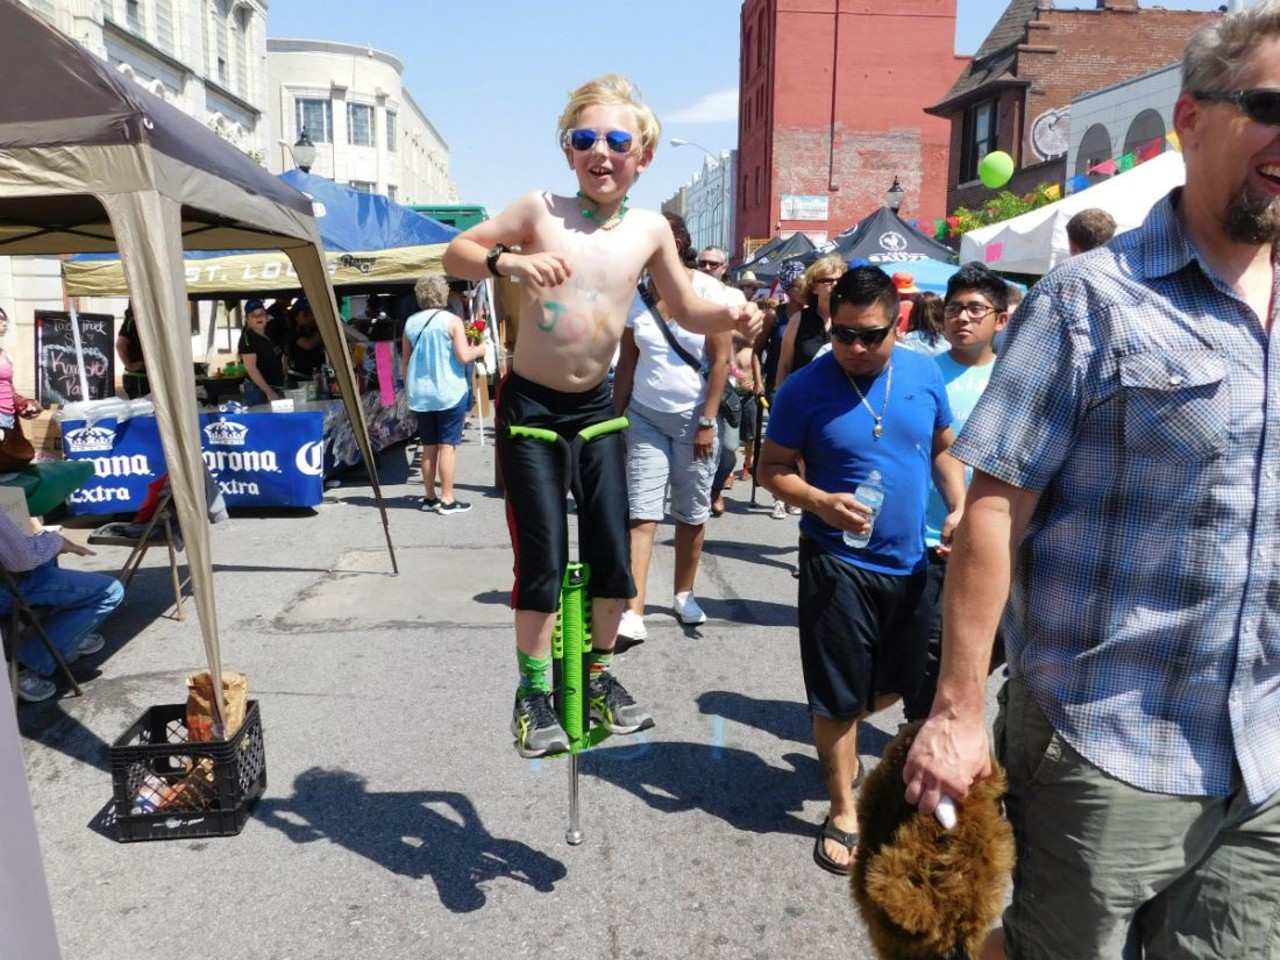 42 Photos That Prove Cinco de Mayo on Cherokee Street Was A Fiesta to Remember